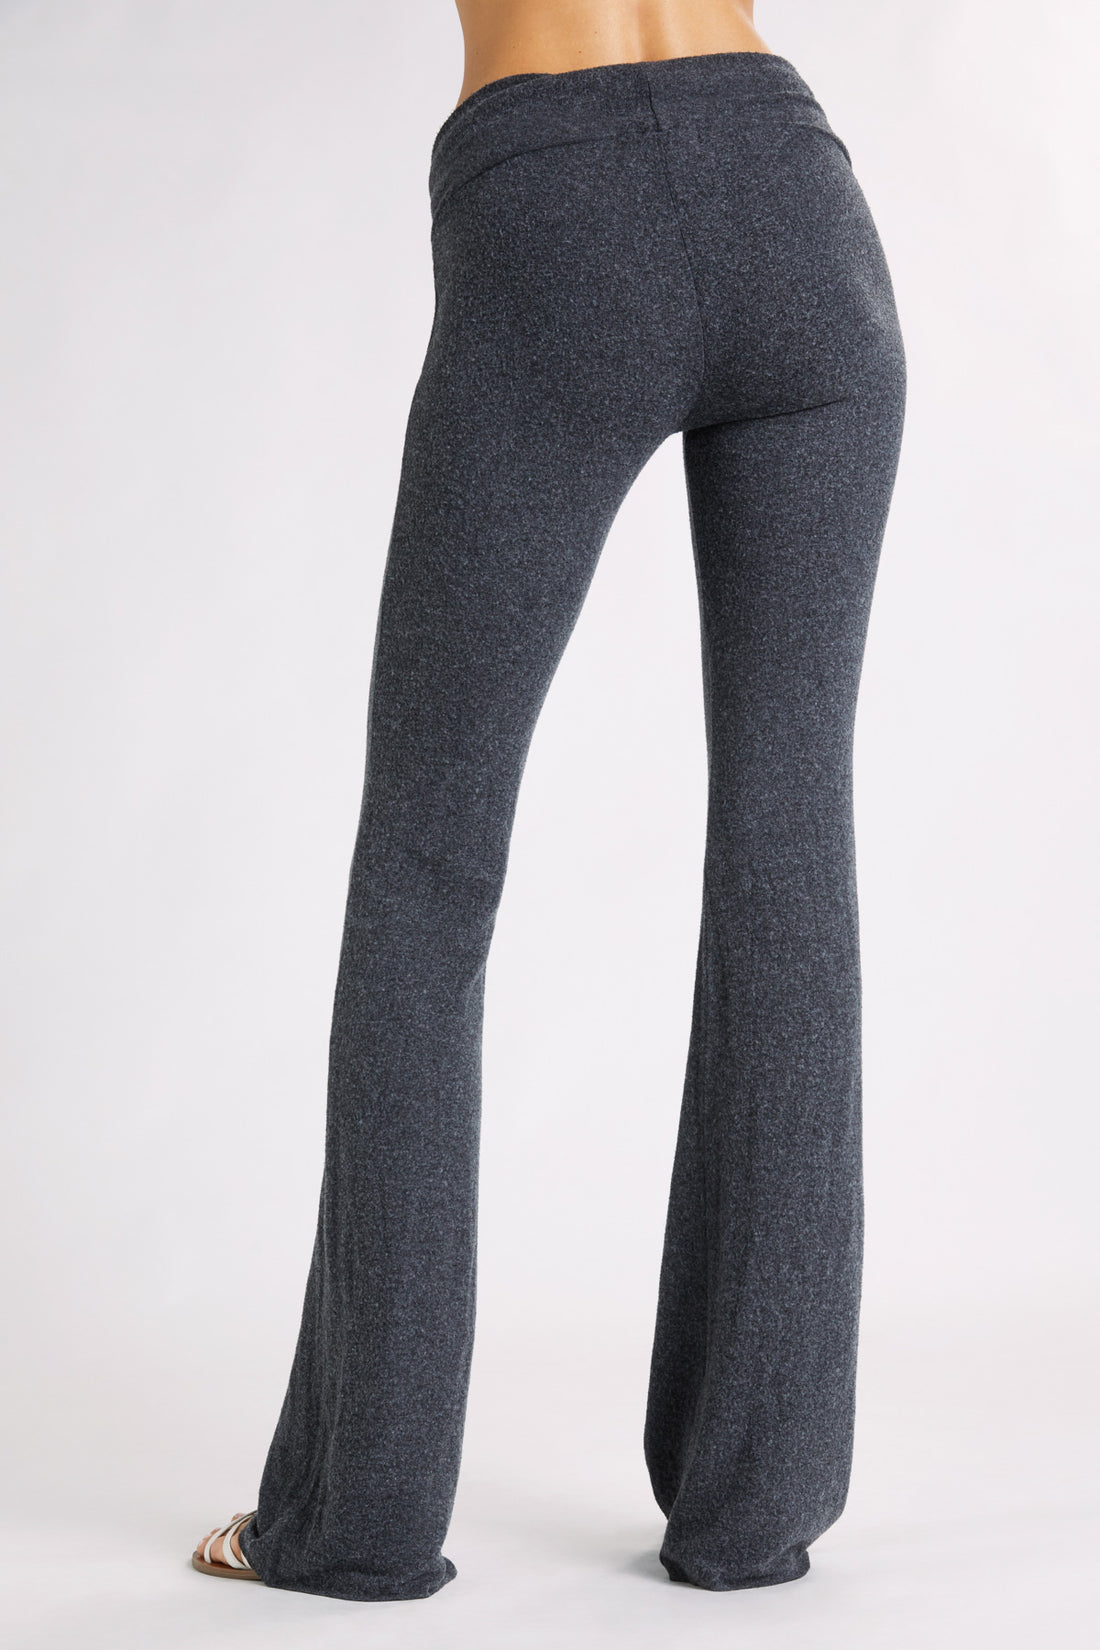 Women's Tennis Club Pants in Clean Black – Wildfox Couture